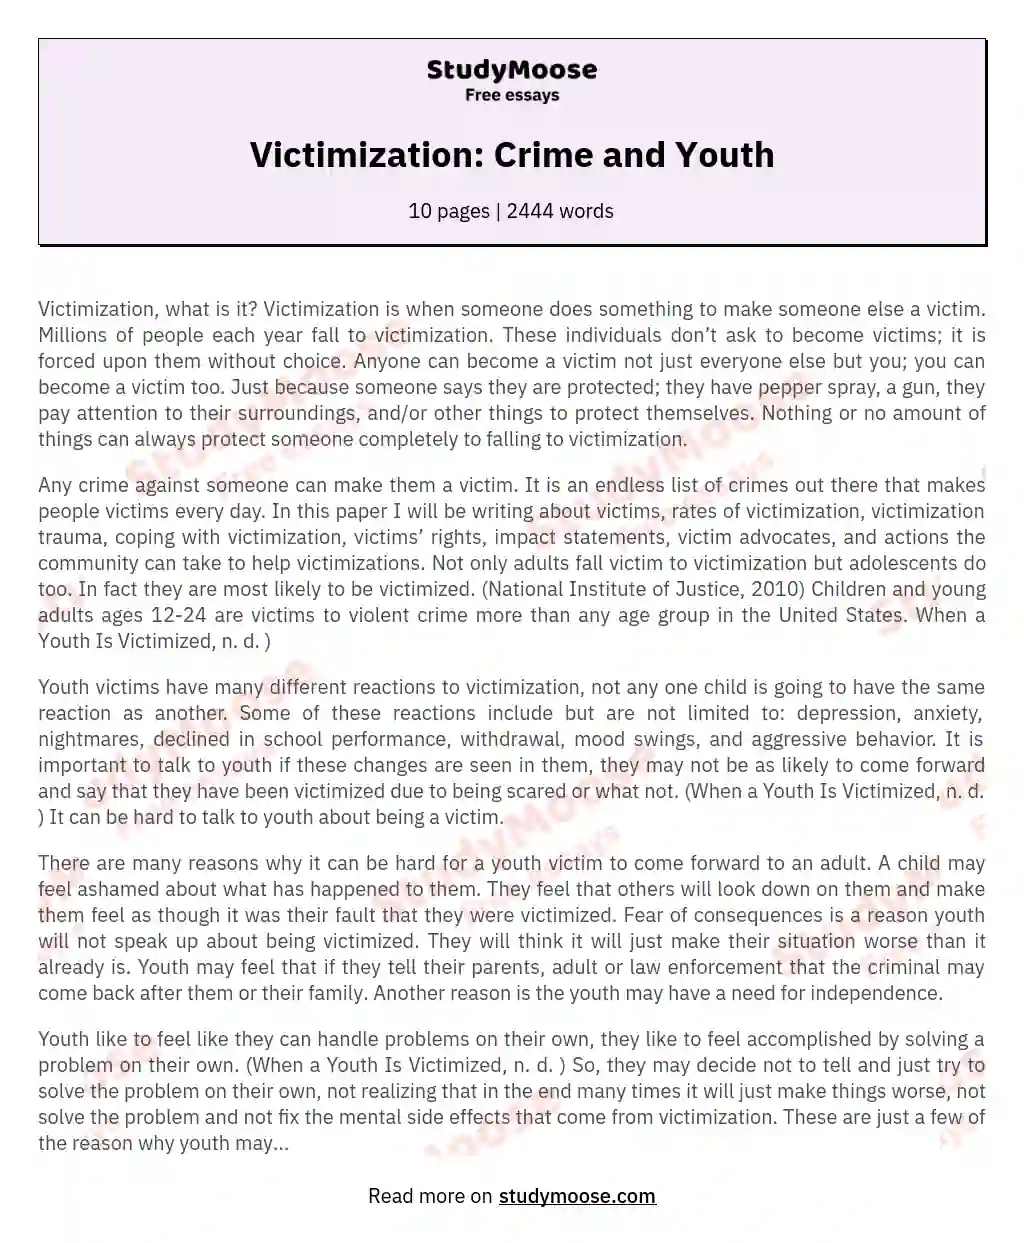 Victimization: Crime and Youth essay